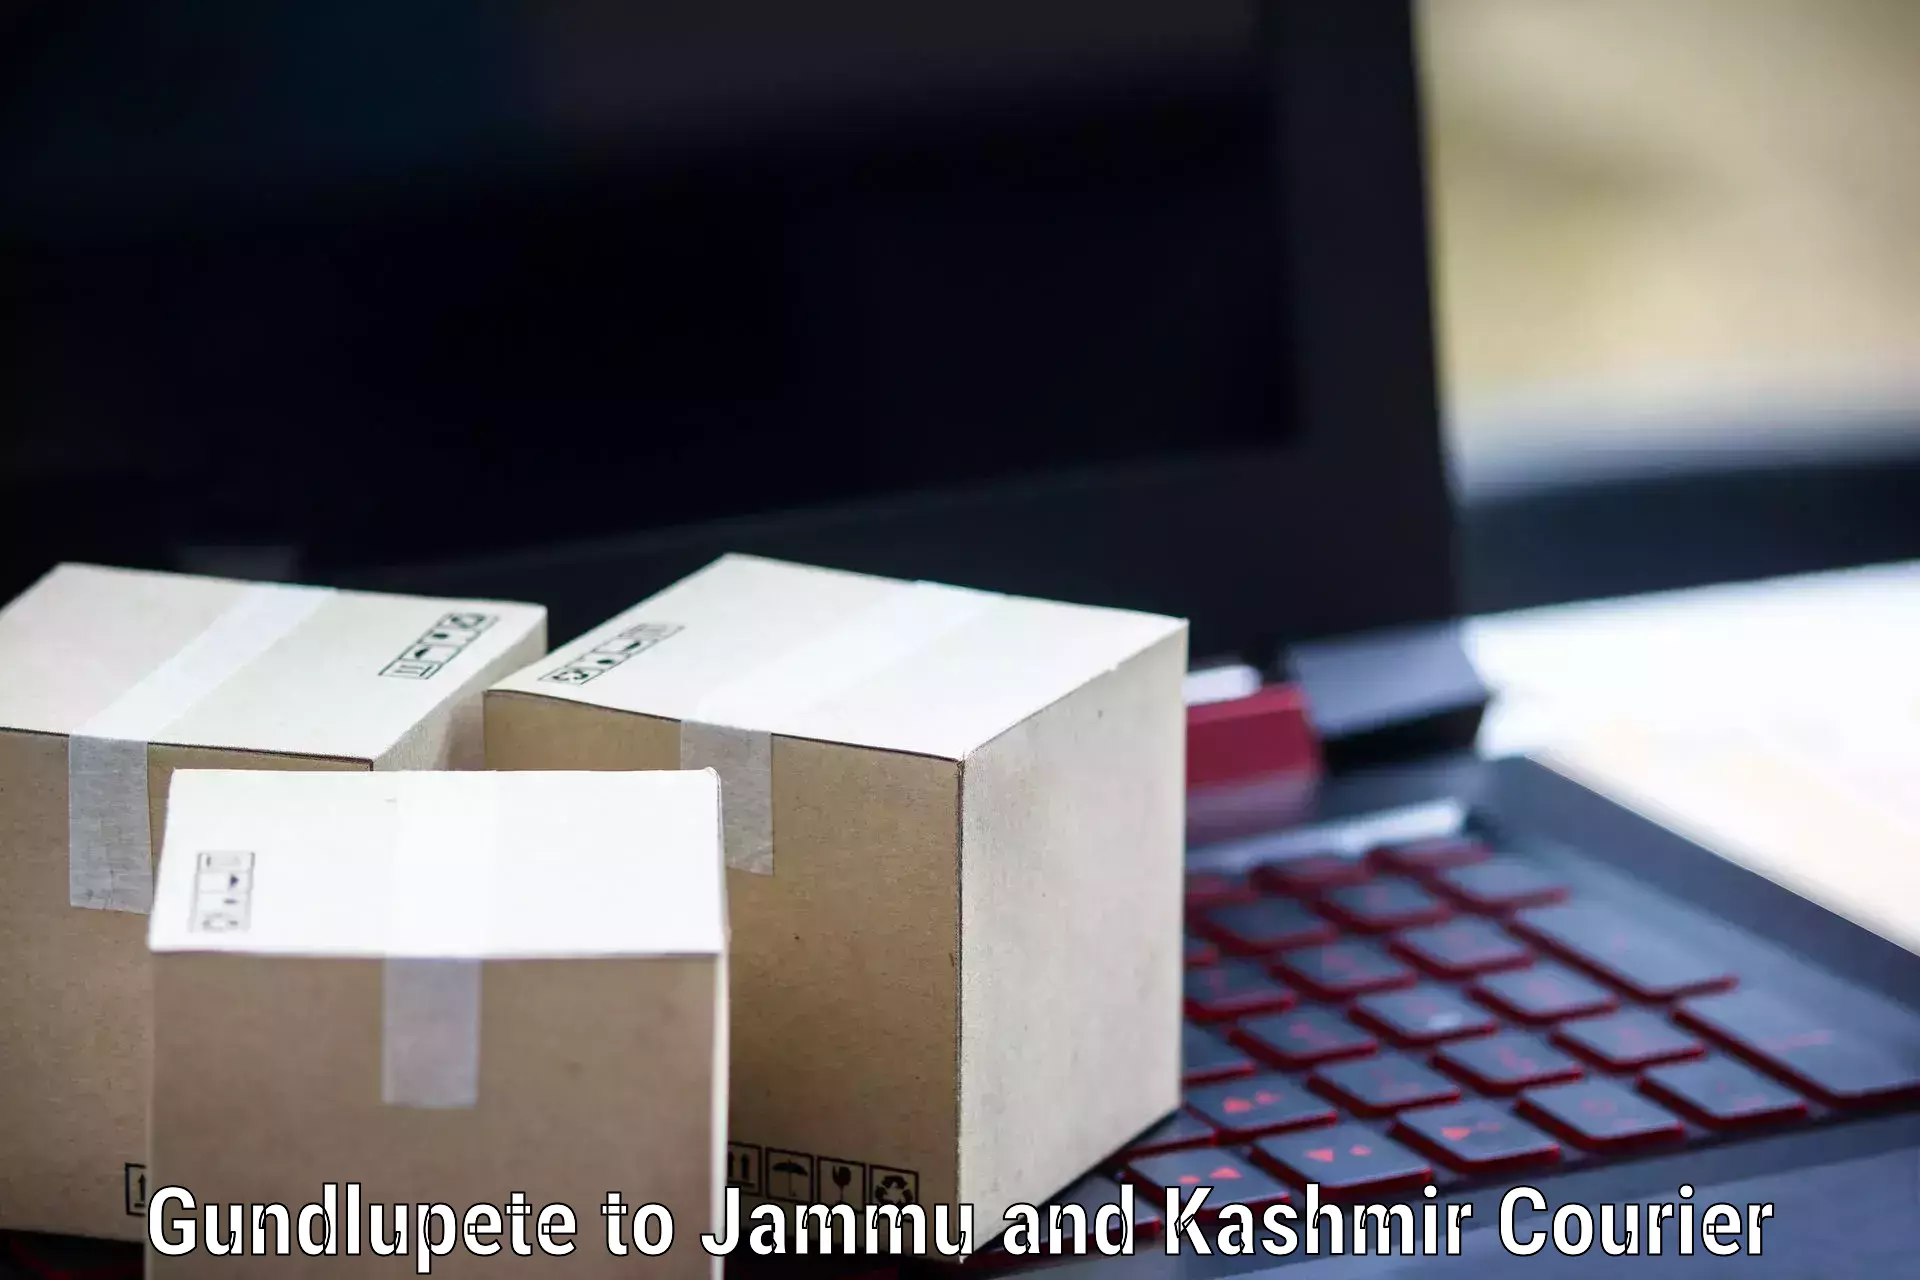 Multi-national courier services Gundlupete to Anantnag